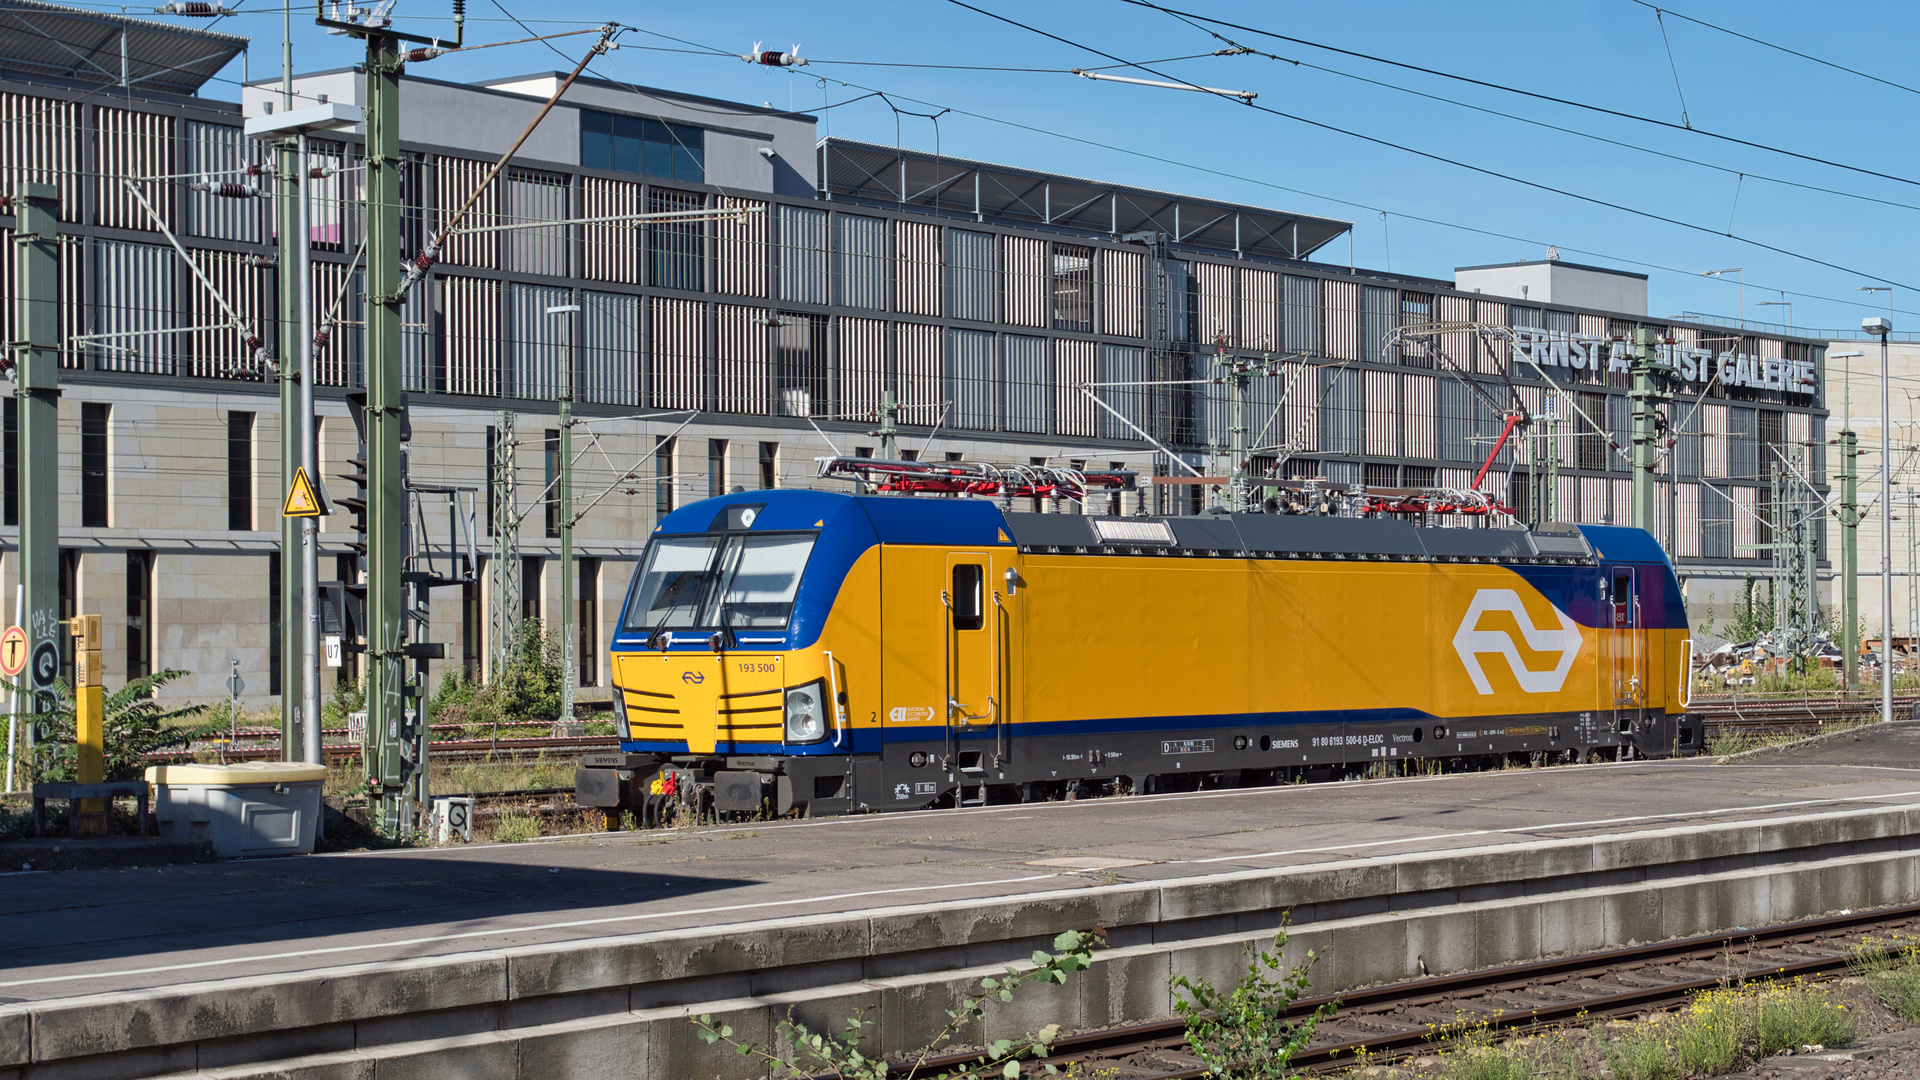 NS-Vectron 193 500 in Hannover